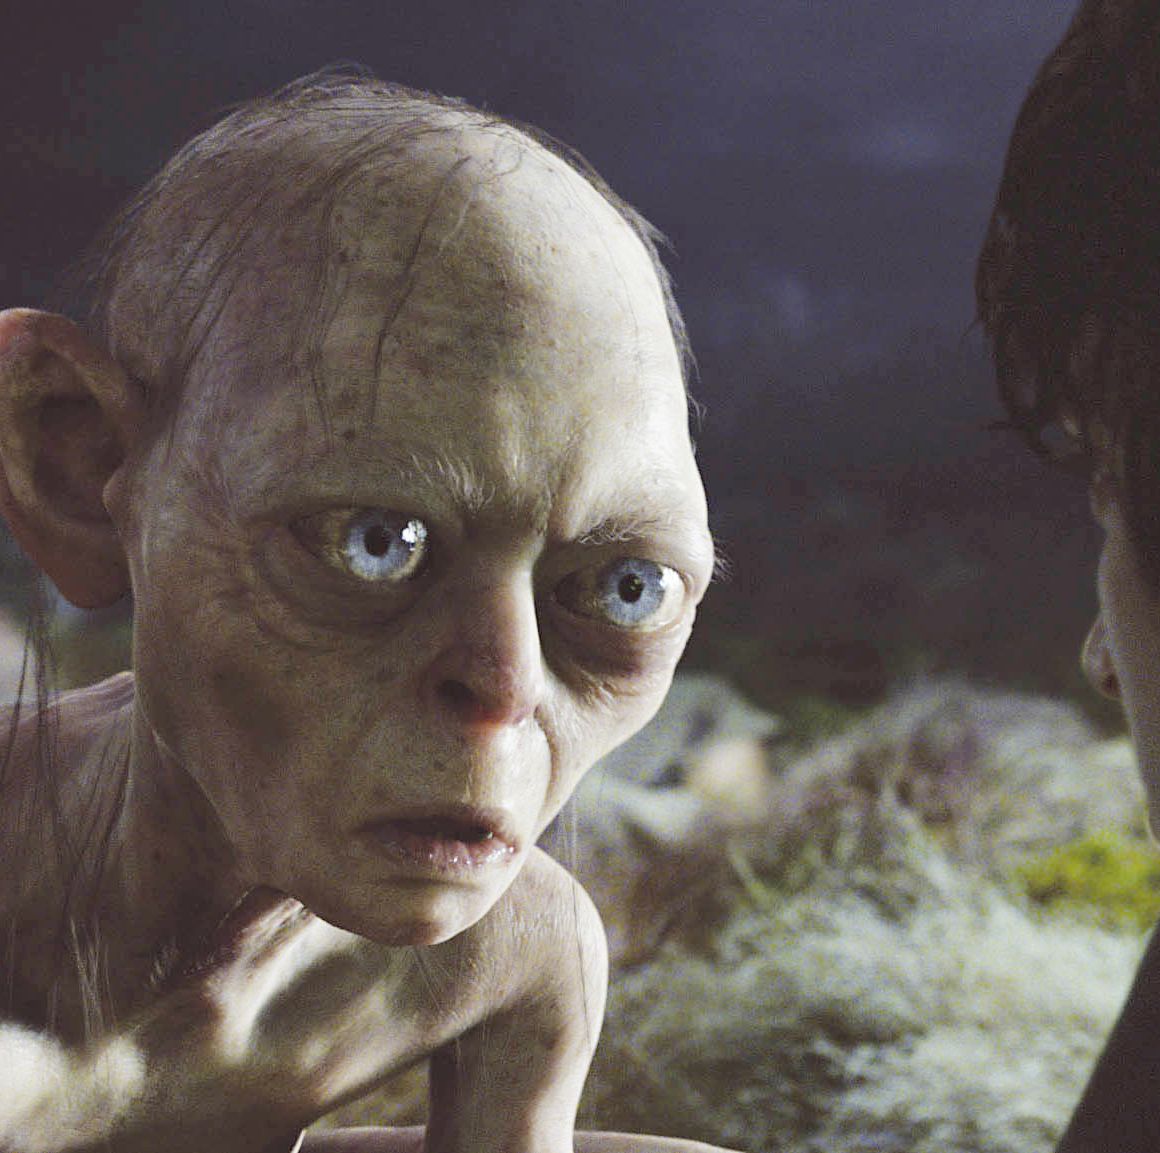 The Strange Way Lord Of The Rings' Andy Serkis Prepared To Play Gollum